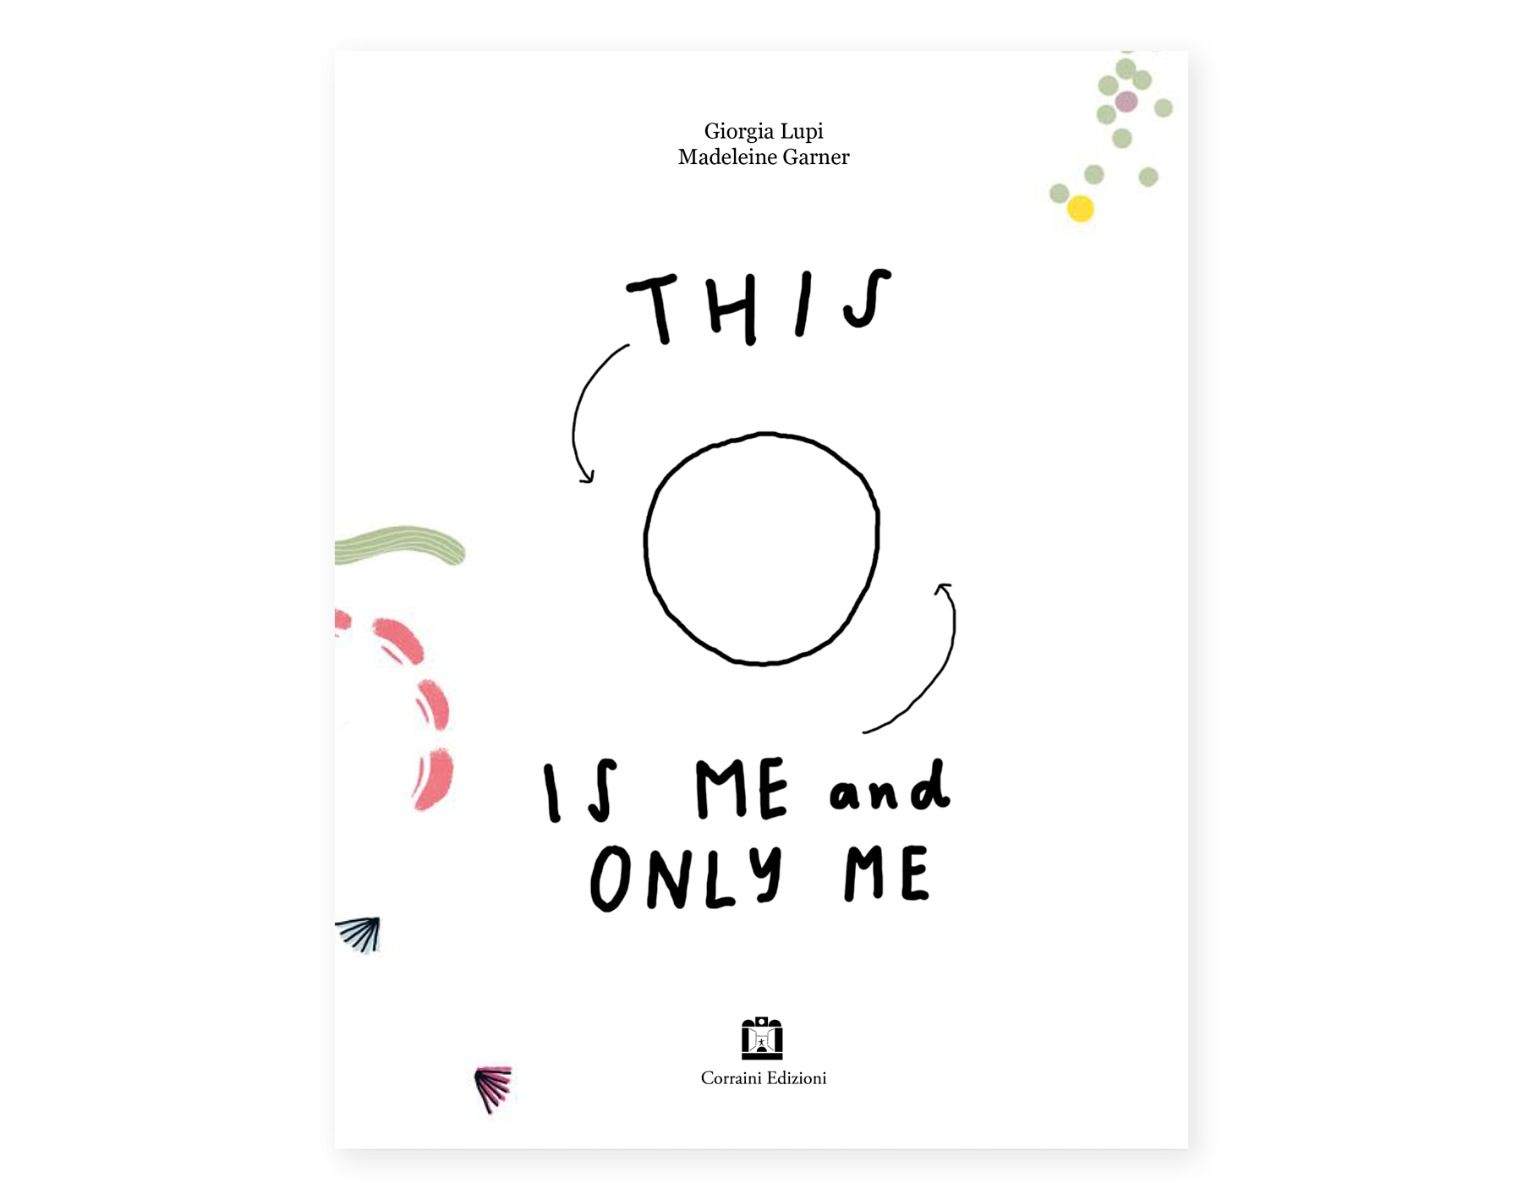 This is me and only me - Giorgia Lupi, Madeleine Garner